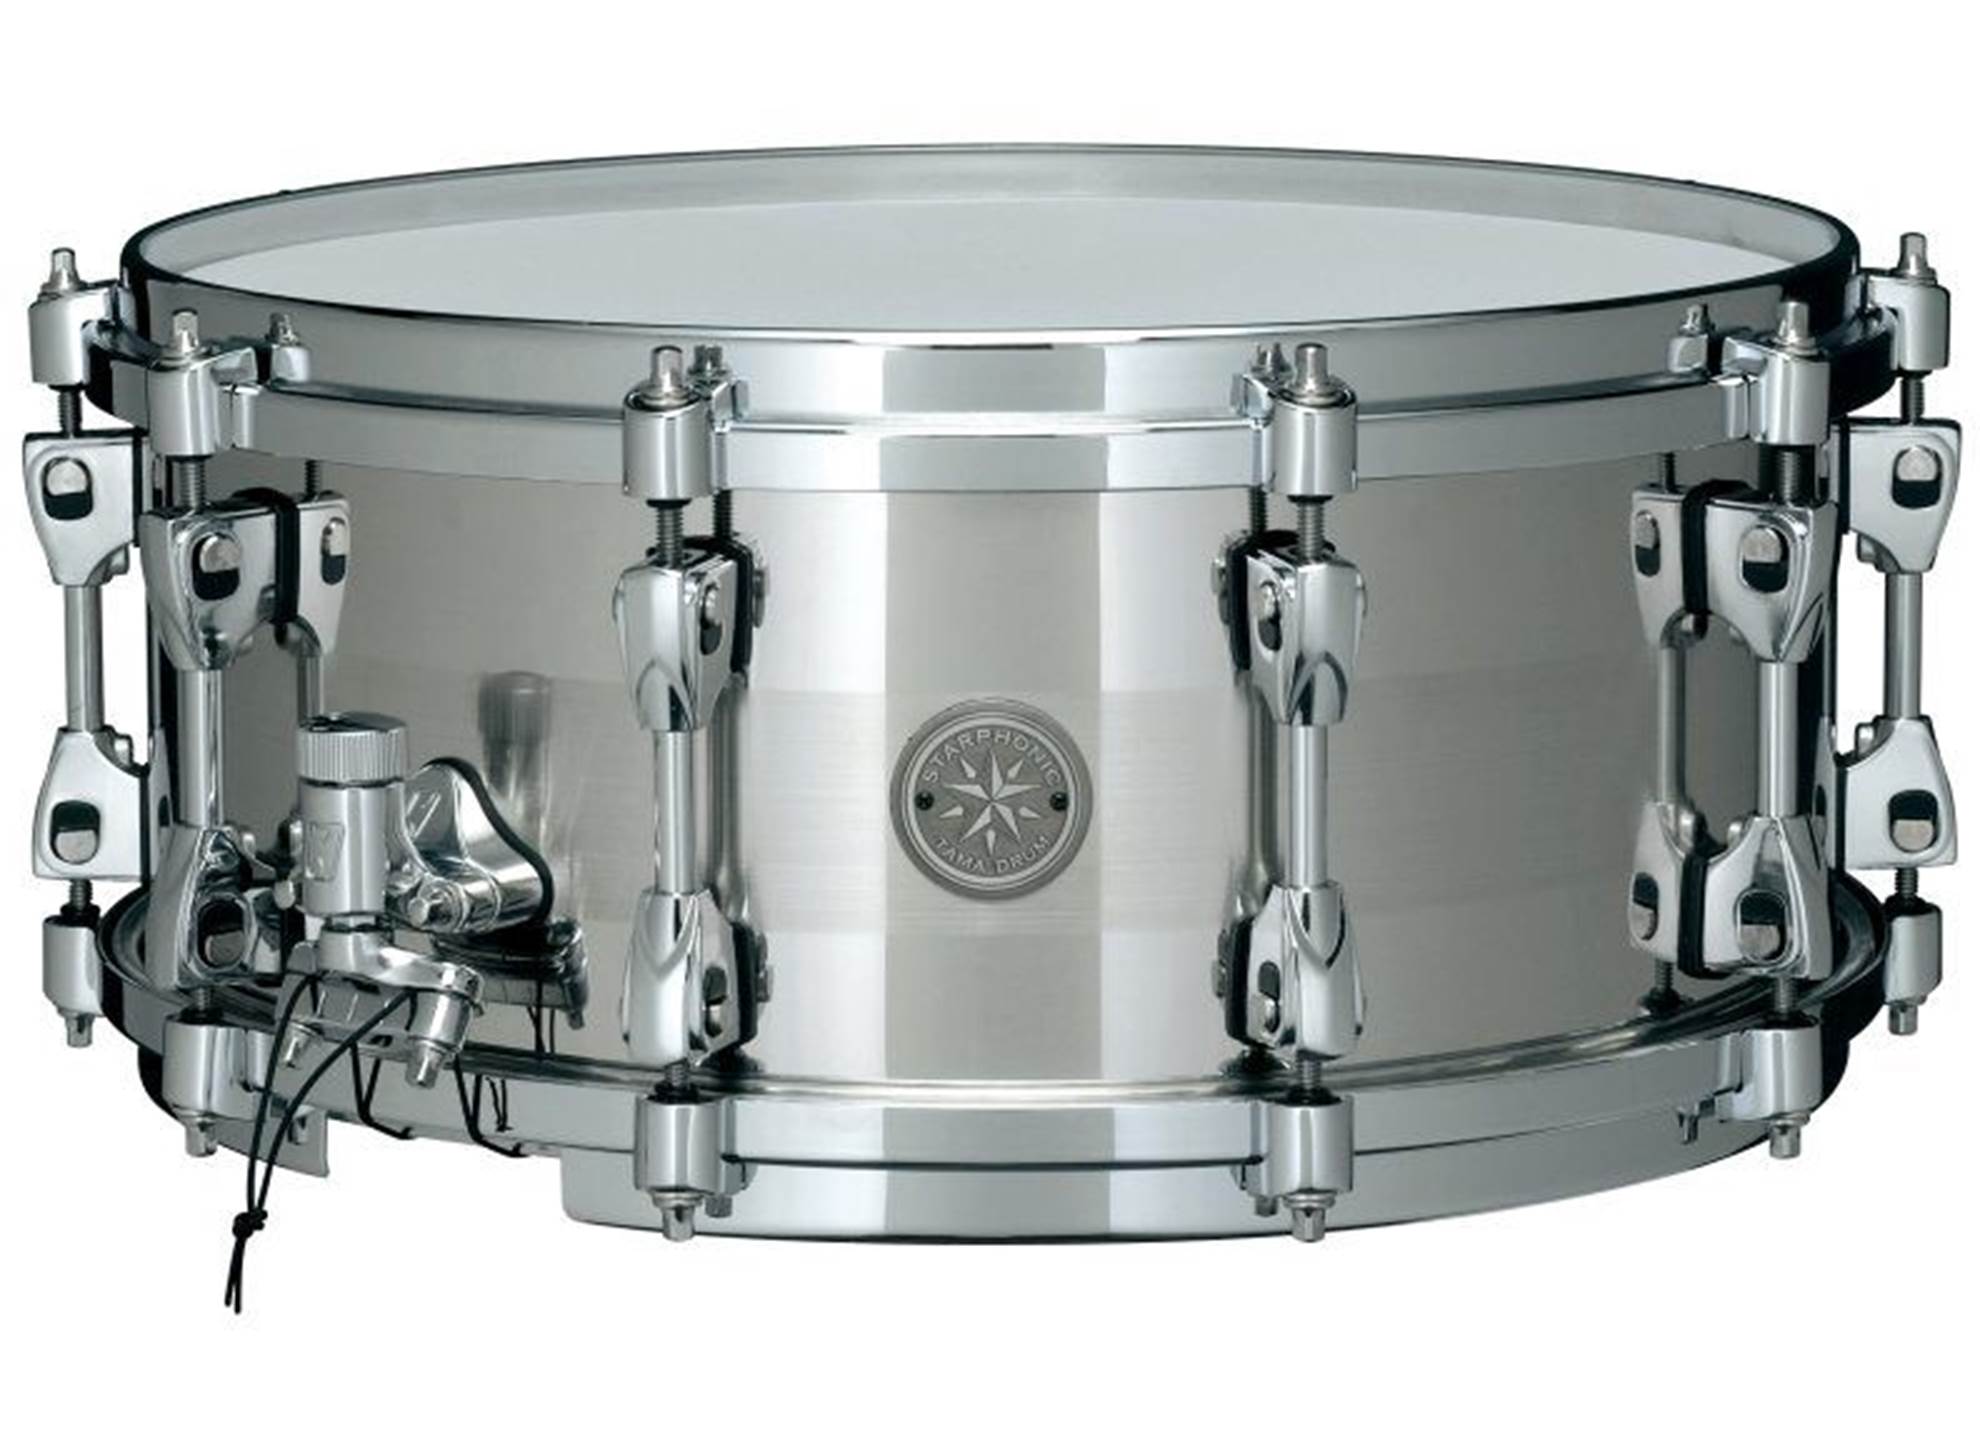 PSS146 Starphonic Stainless Steel